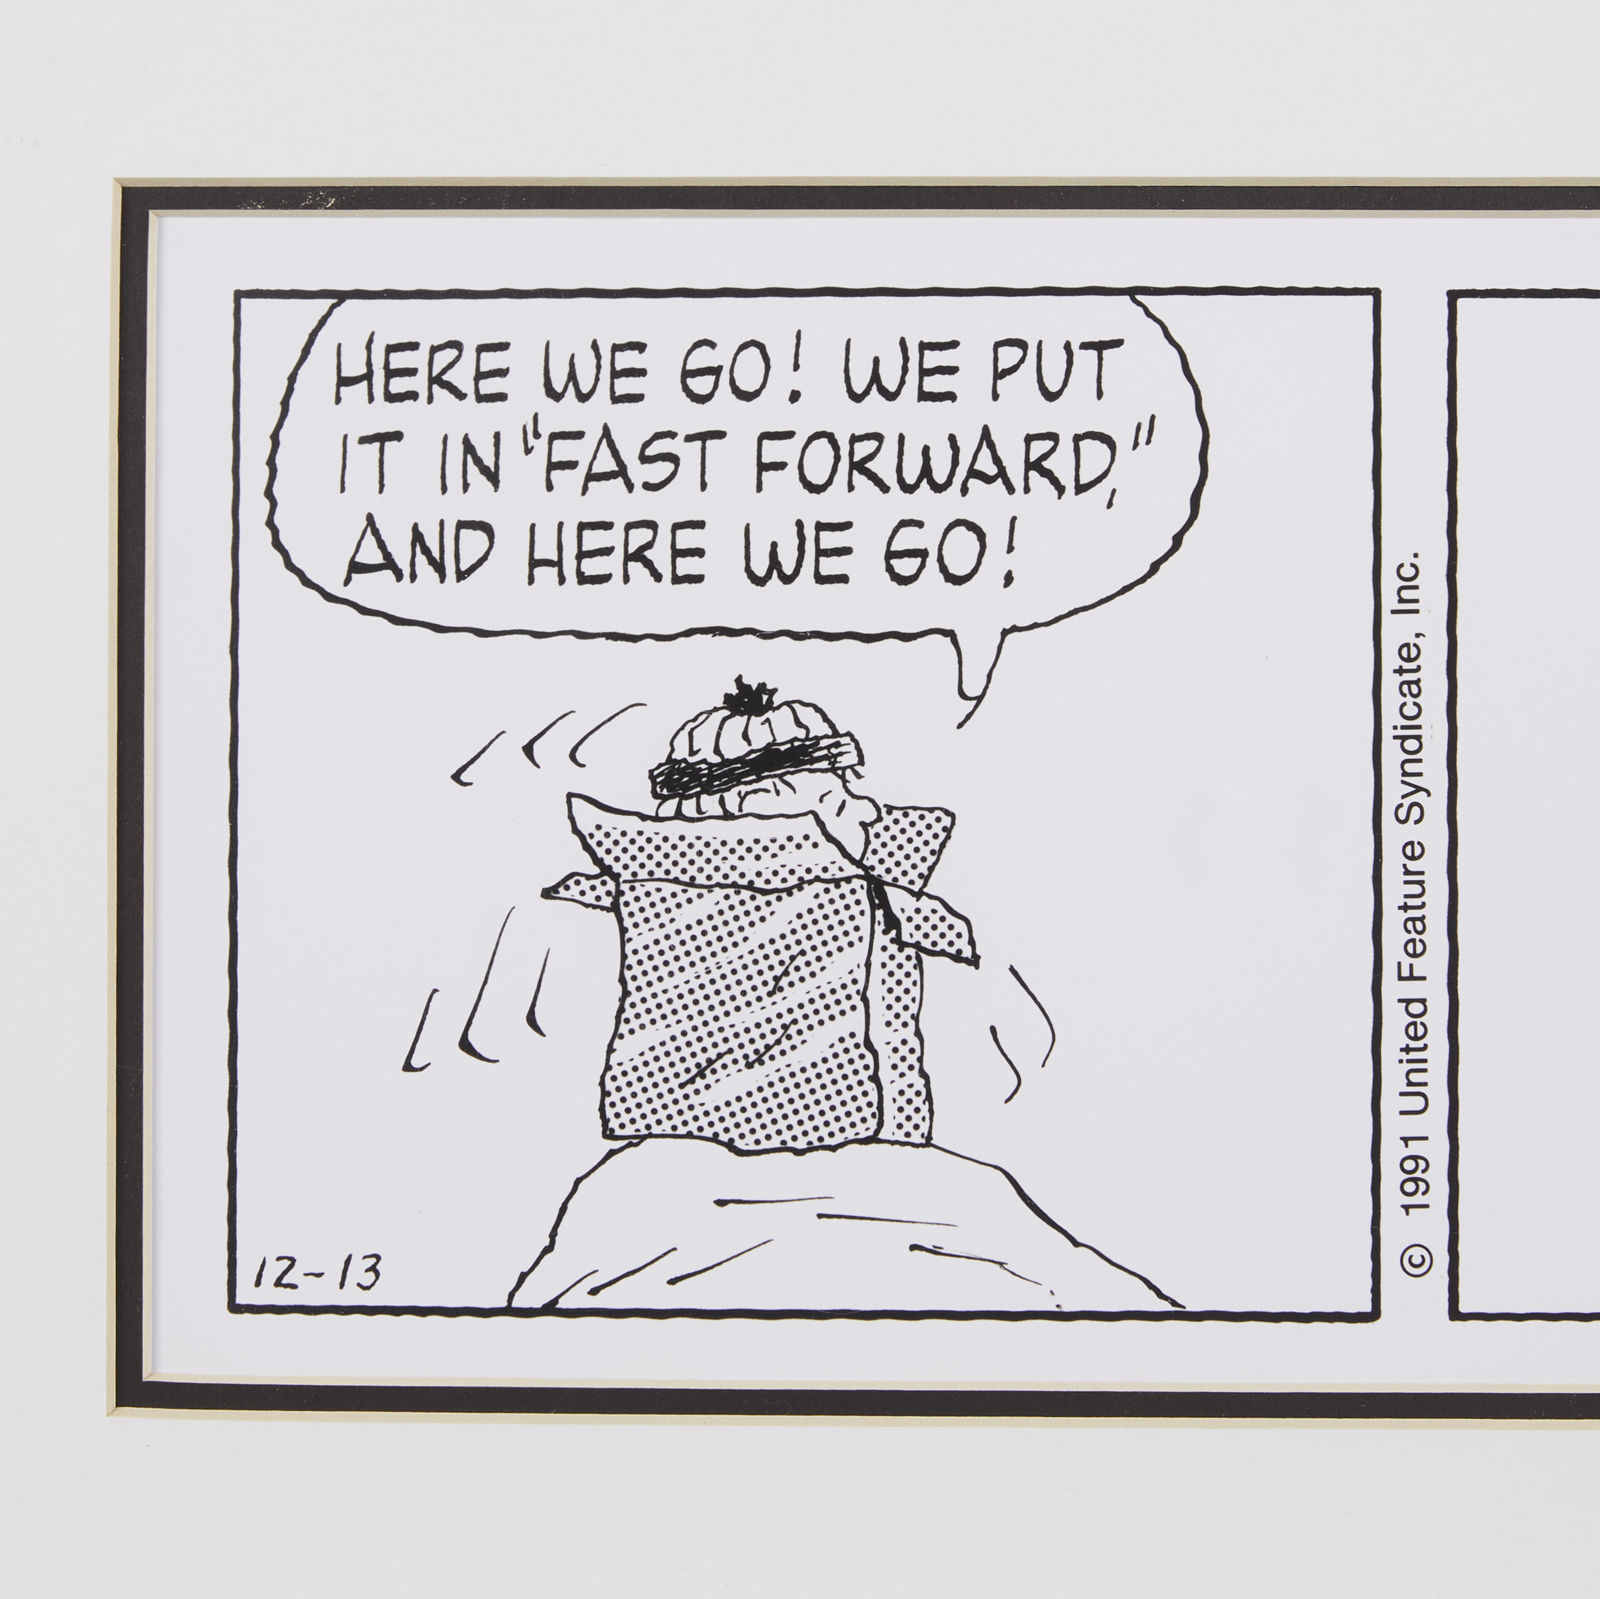 Peanuts Comic Strip Lithograph December 13, 1991 - Image 3 of 7